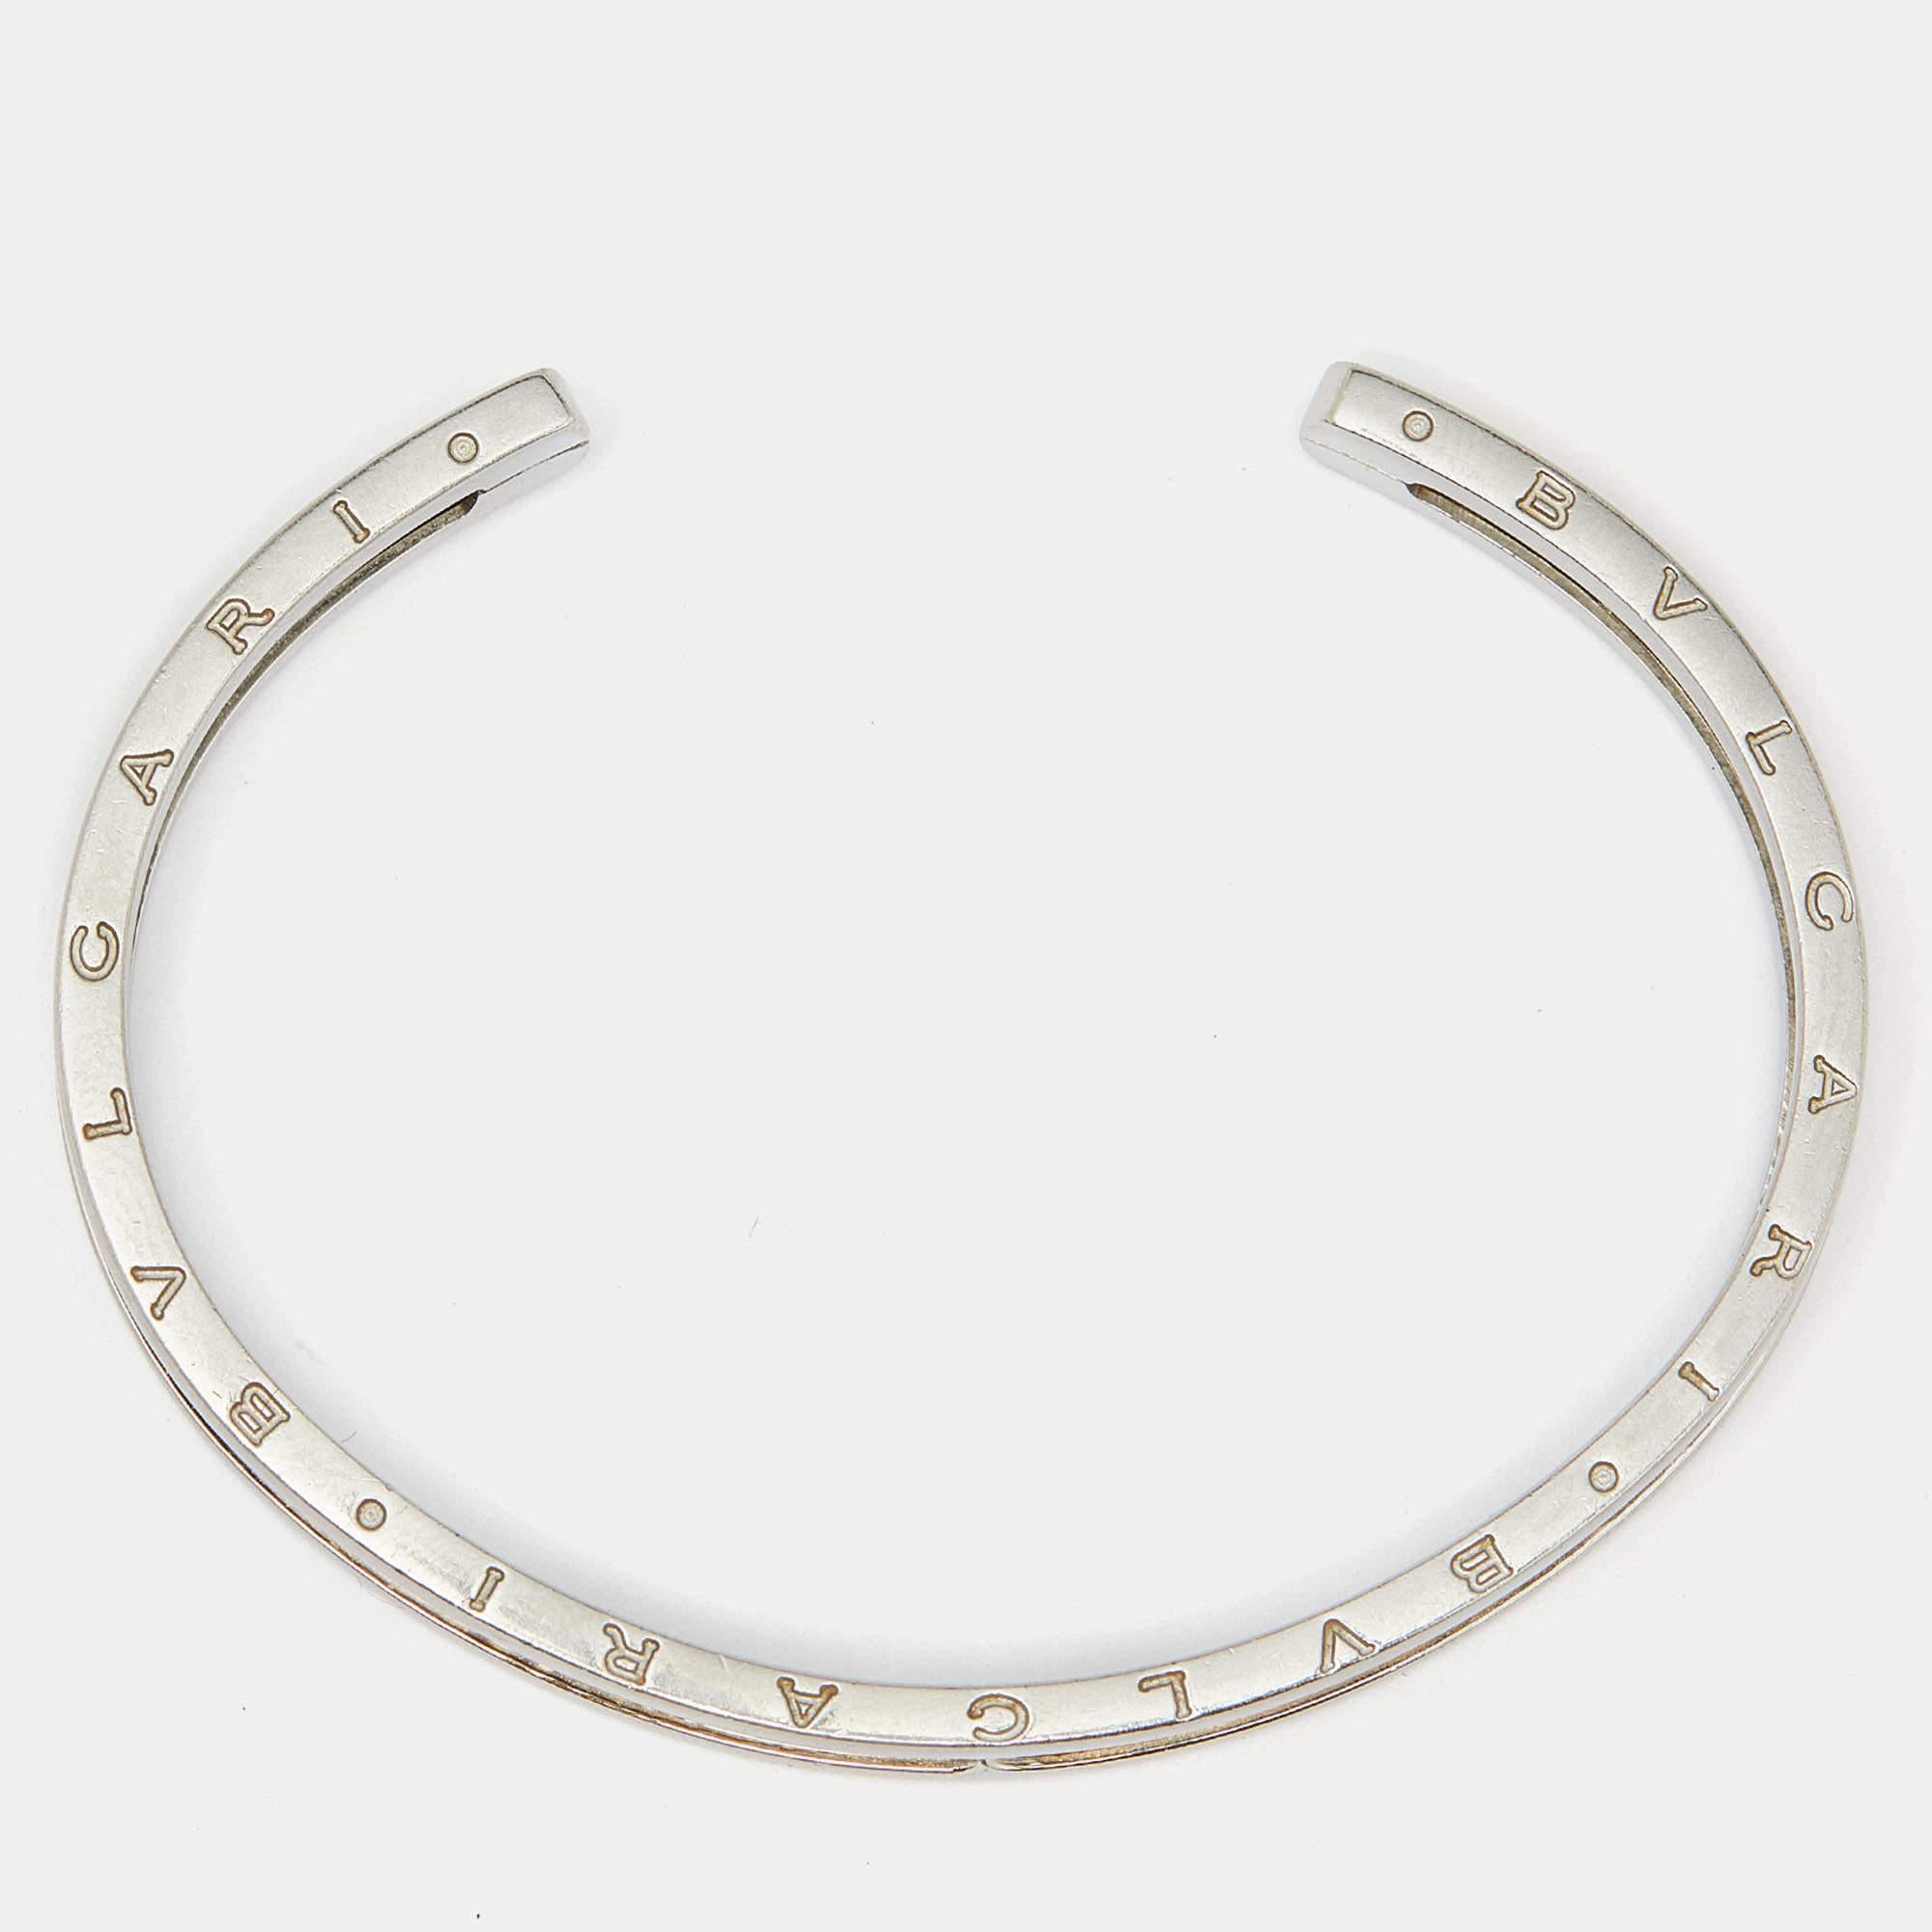 Adorn your wrist with this stunner of a bracelet from Bvlgari. The piece is from their B.Zero1 collection and it has been crafted from steel and beautifully lined with 18k rose gold along the center. It is complete with the brand's lettering on the